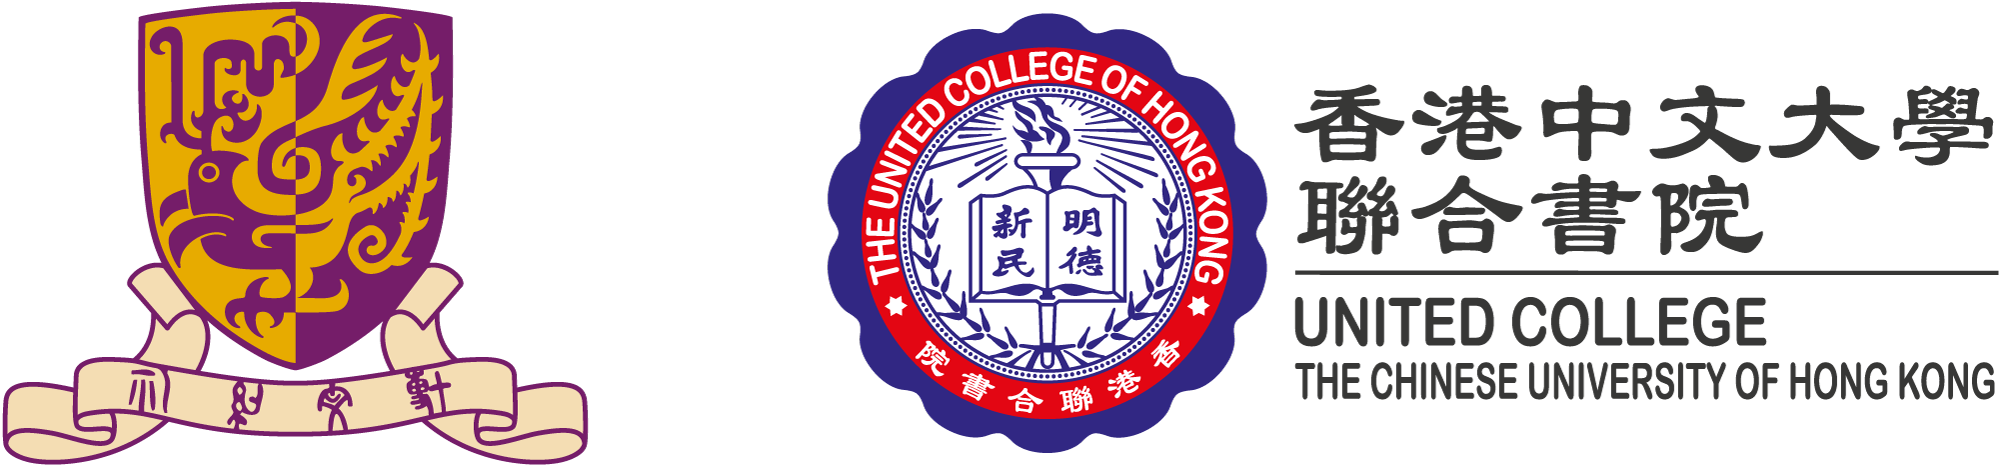 United College, The Chinese University of Hong Kong